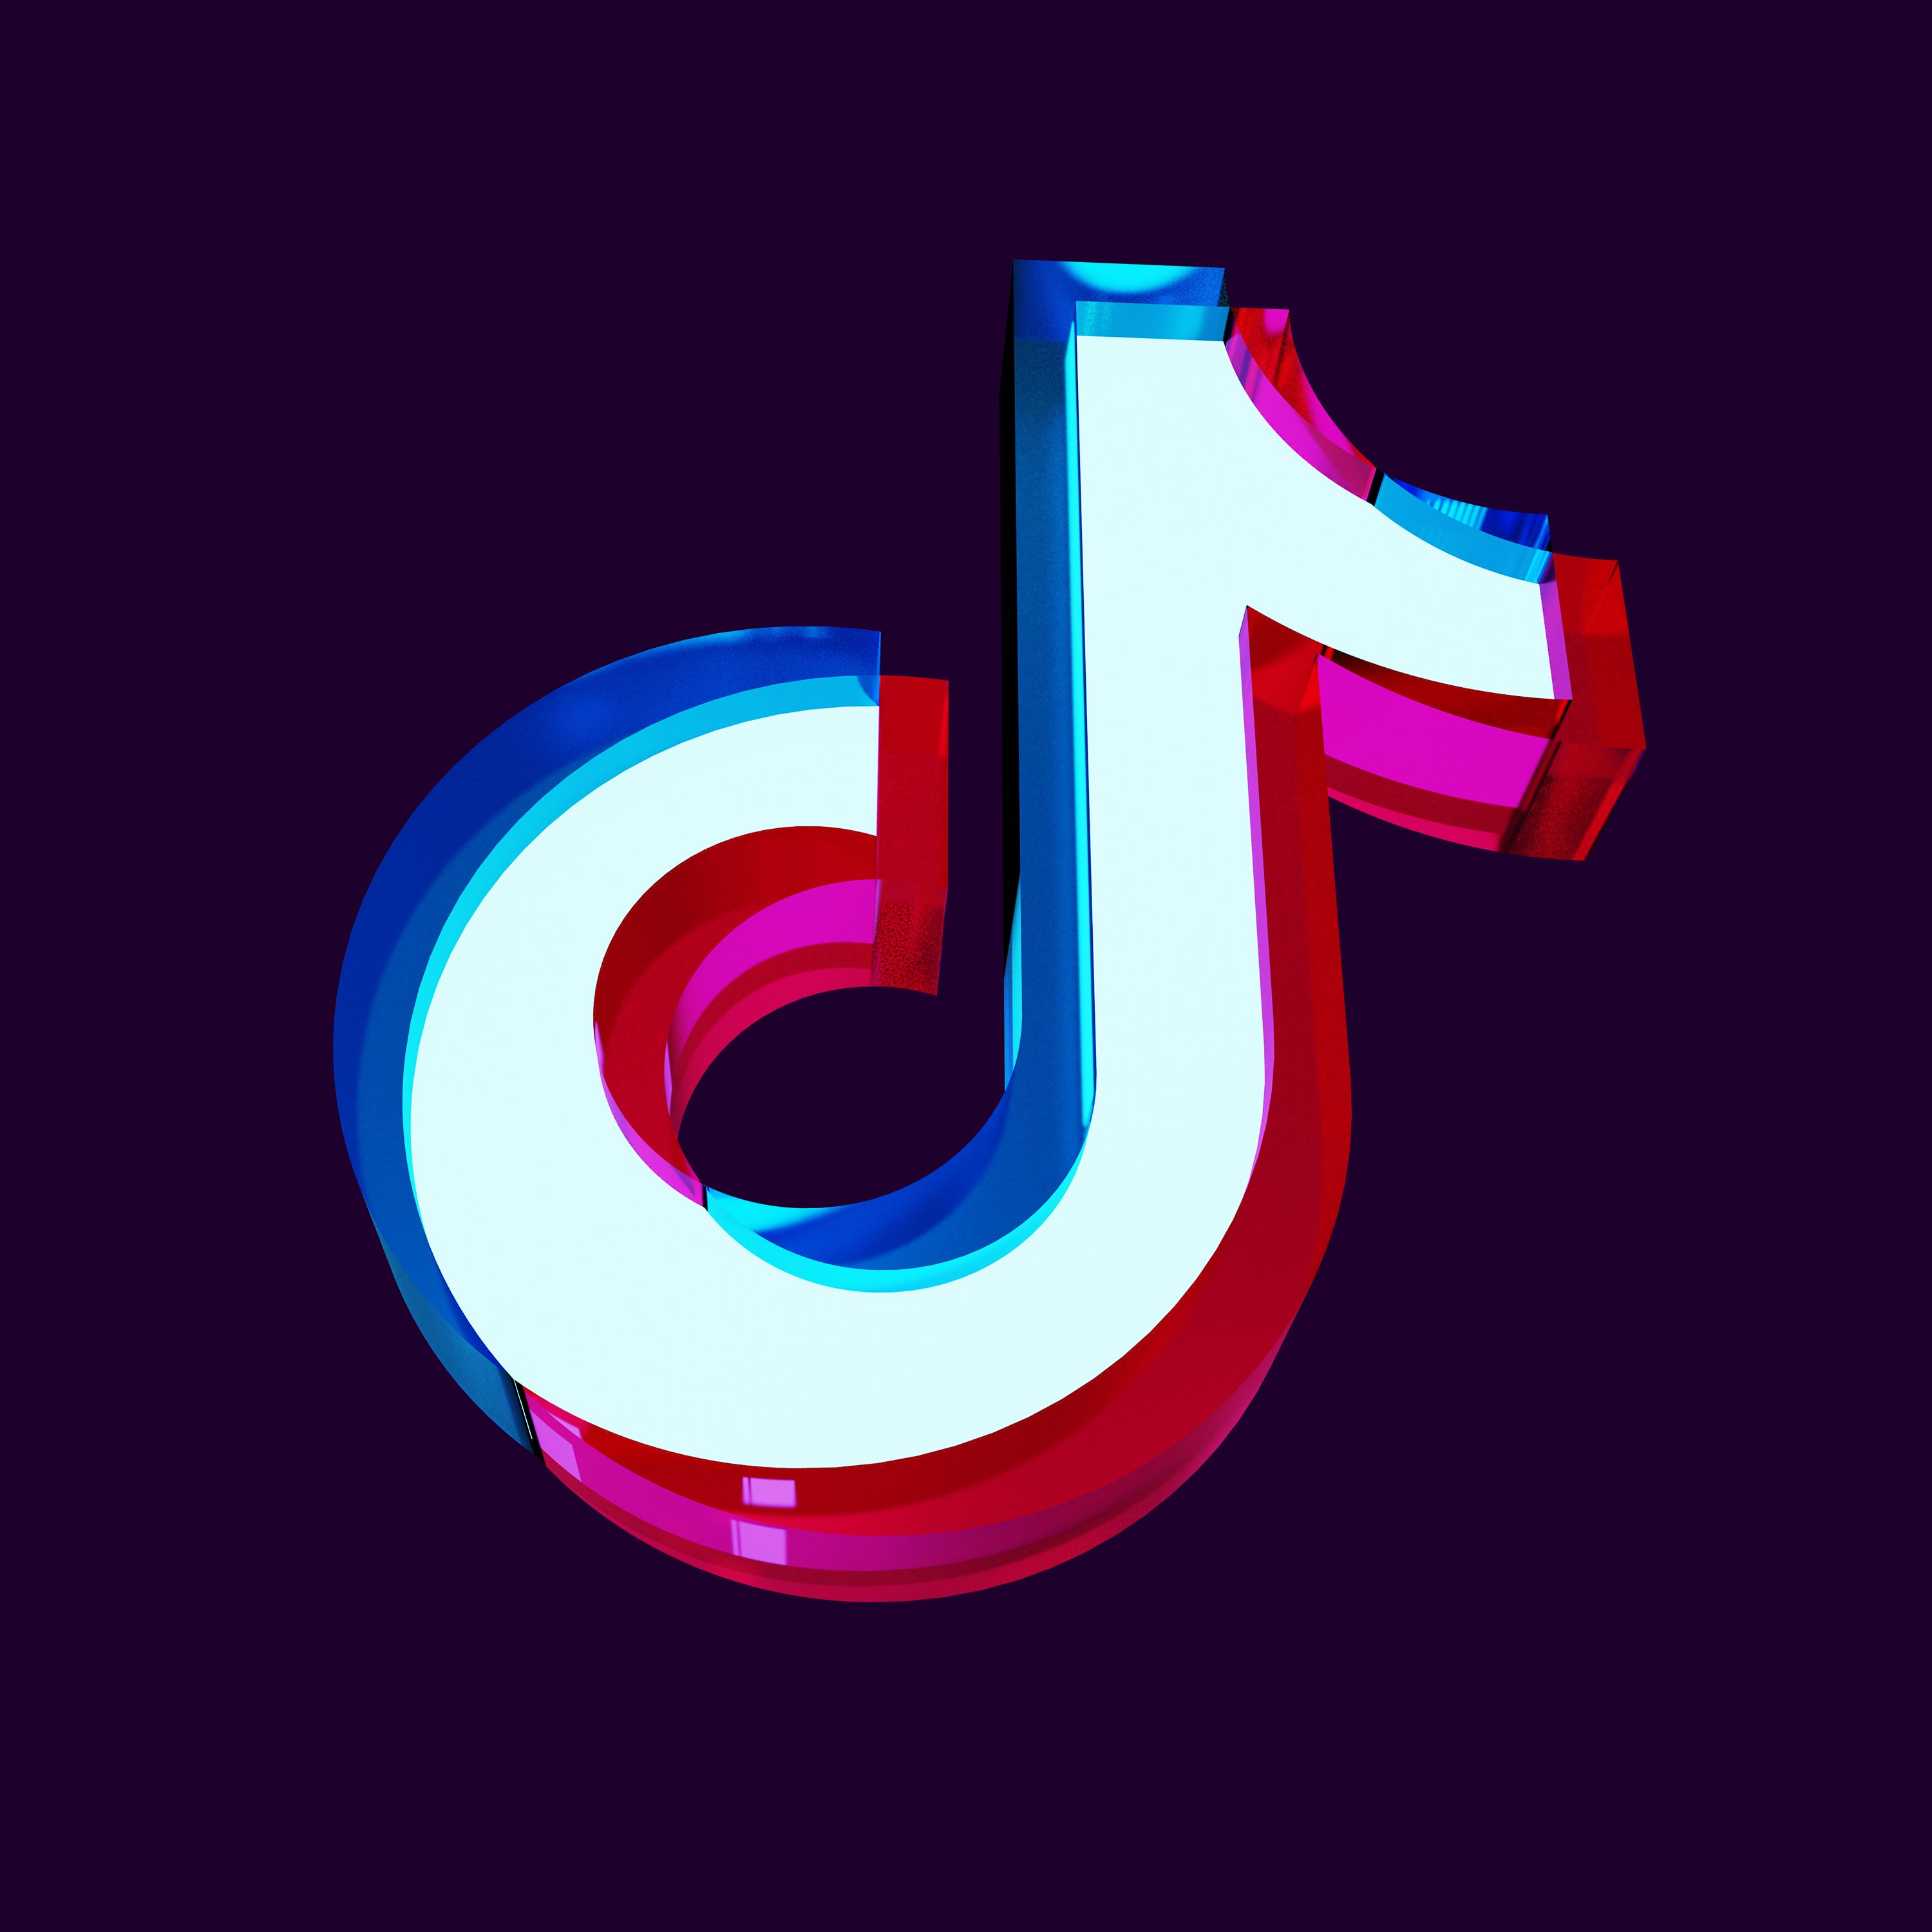 How to become famous on TikTok?